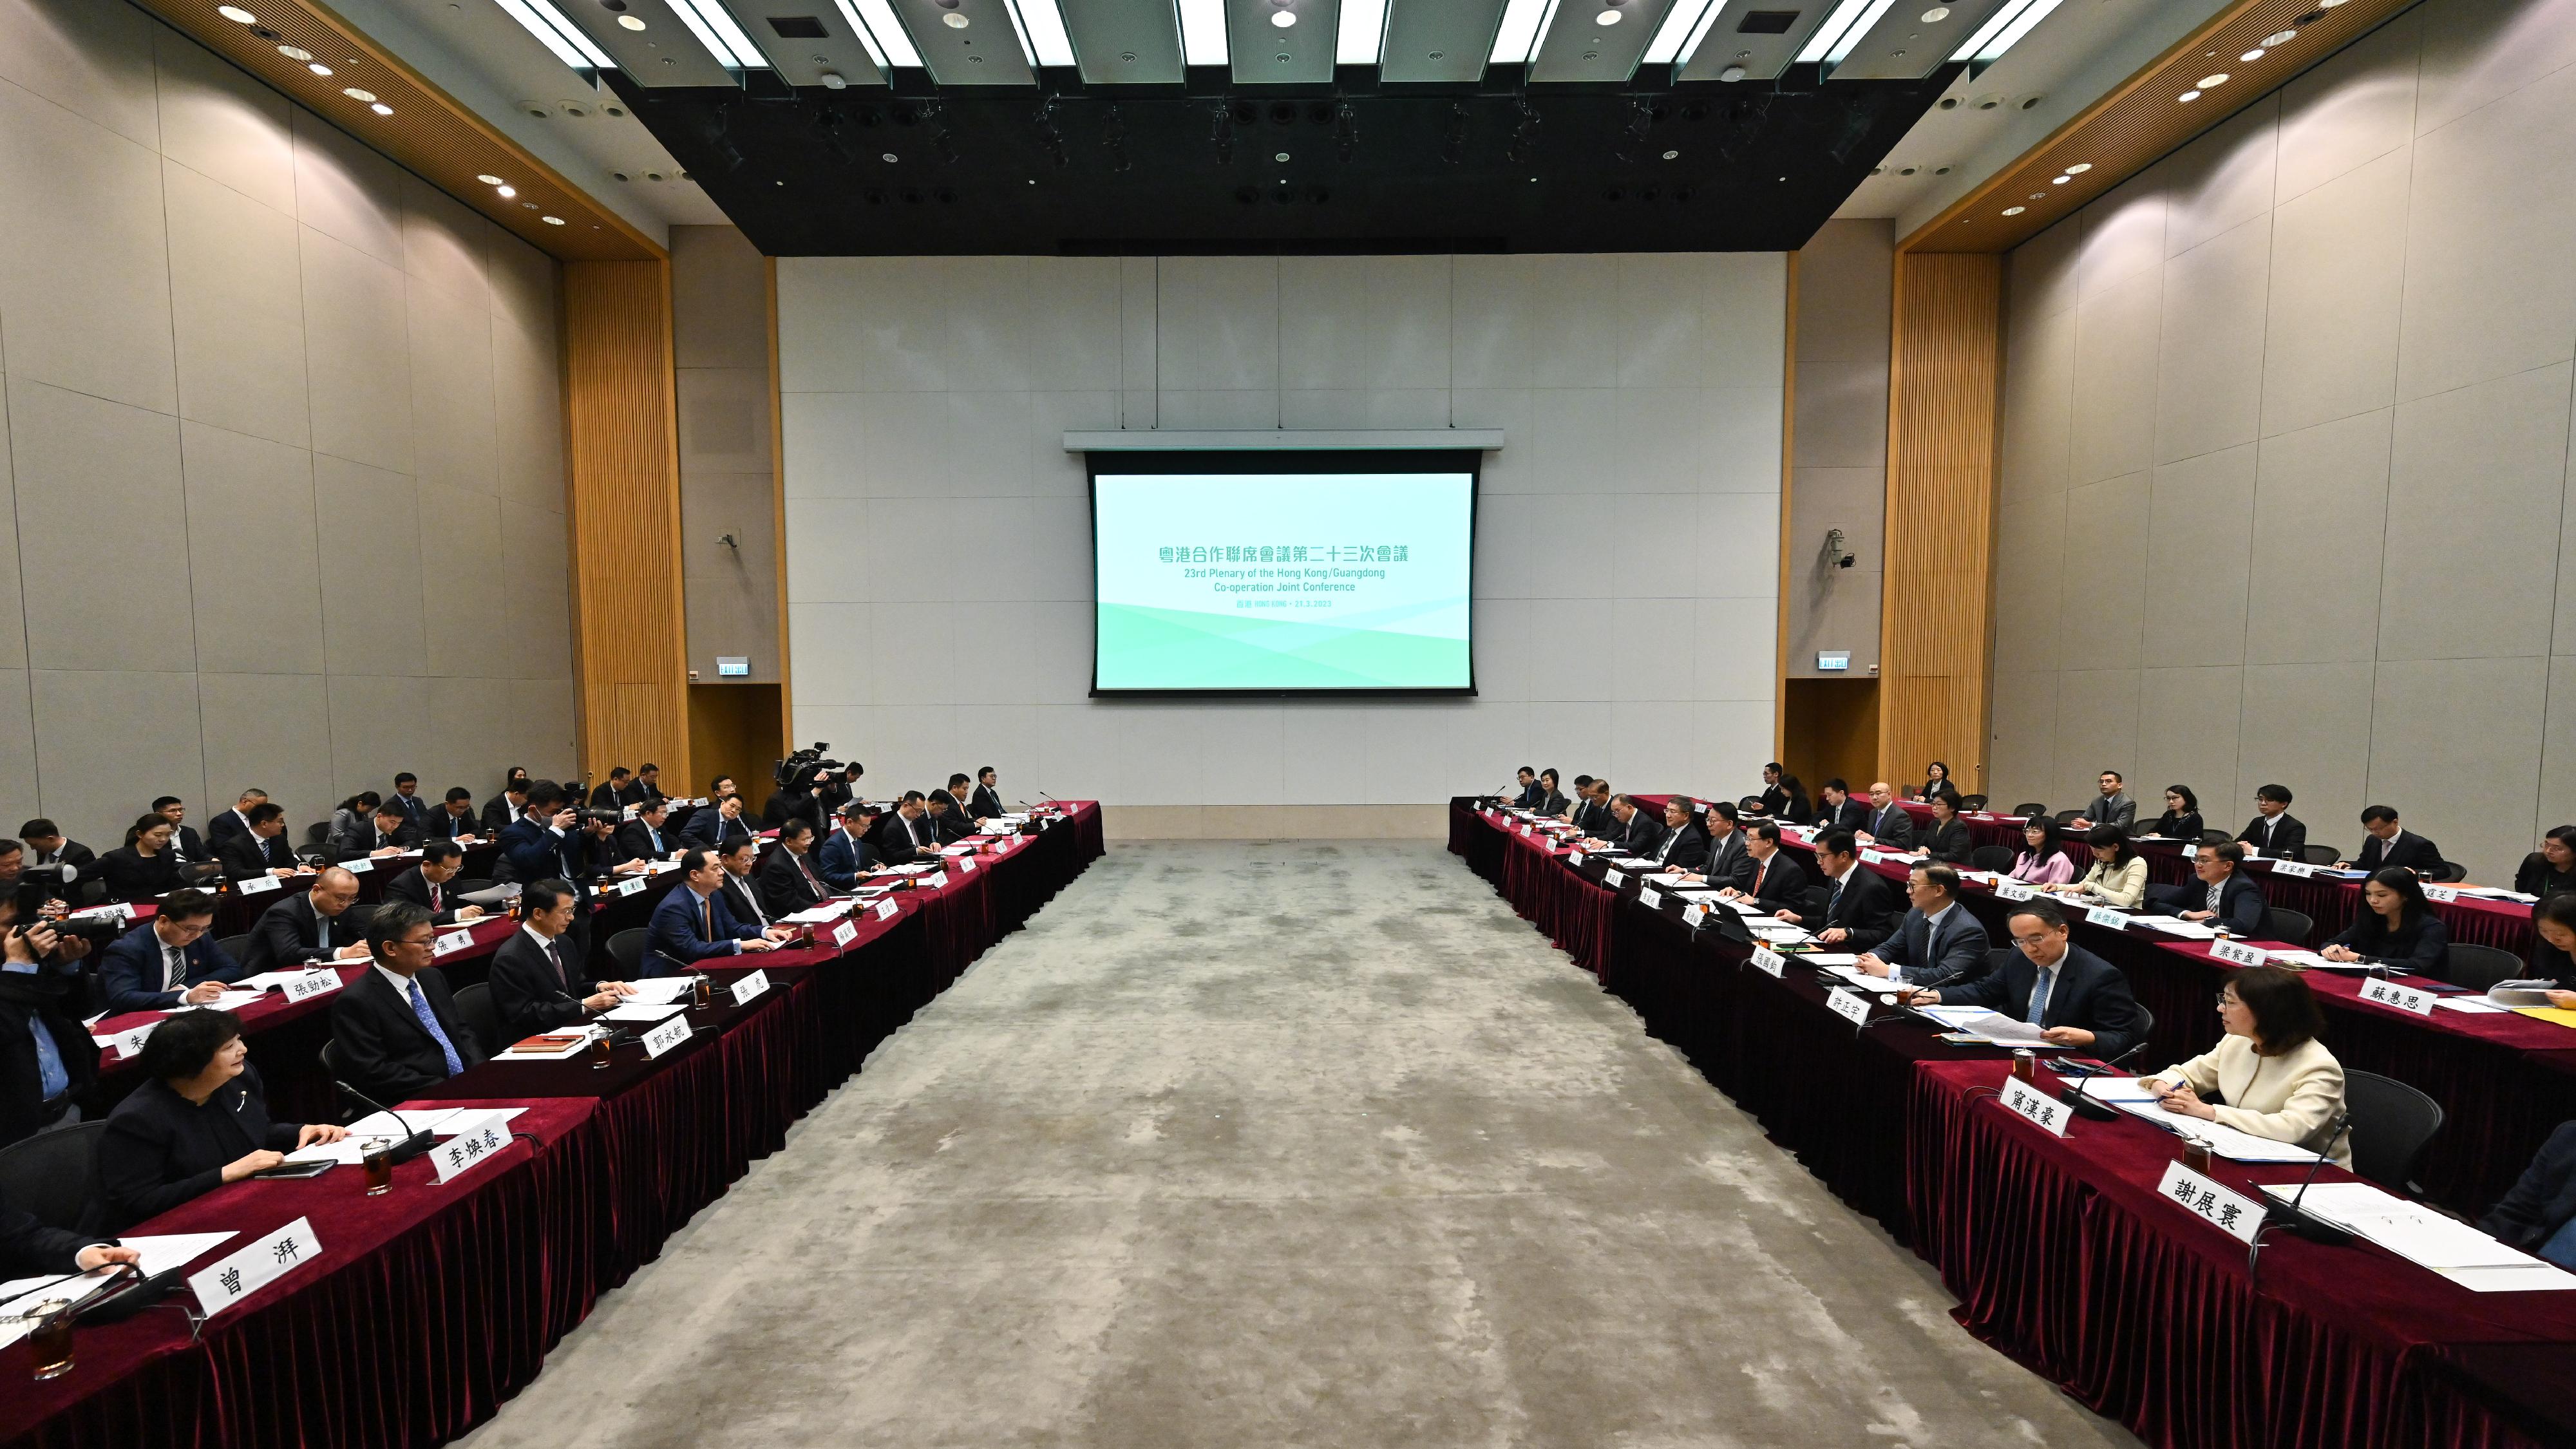 The Chief Executive, Mr John Lee, led the Hong Kong Special Administrative Region Government delegation to attend the 23rd Plenary of the Hong Kong/Guangdong Co-operation Joint Conference in the Central Government Offices today (March 21). Photo shows Mr Lee (fifth right) and the Governor of Guangdong Province, Mr Wang Weizhong (fifth left), co-chairing the Plenary. Also joining the meeting were the Chief Secretary for Administration, Mr Chan Kwok-ki (sixth right), and other officials from both sides.